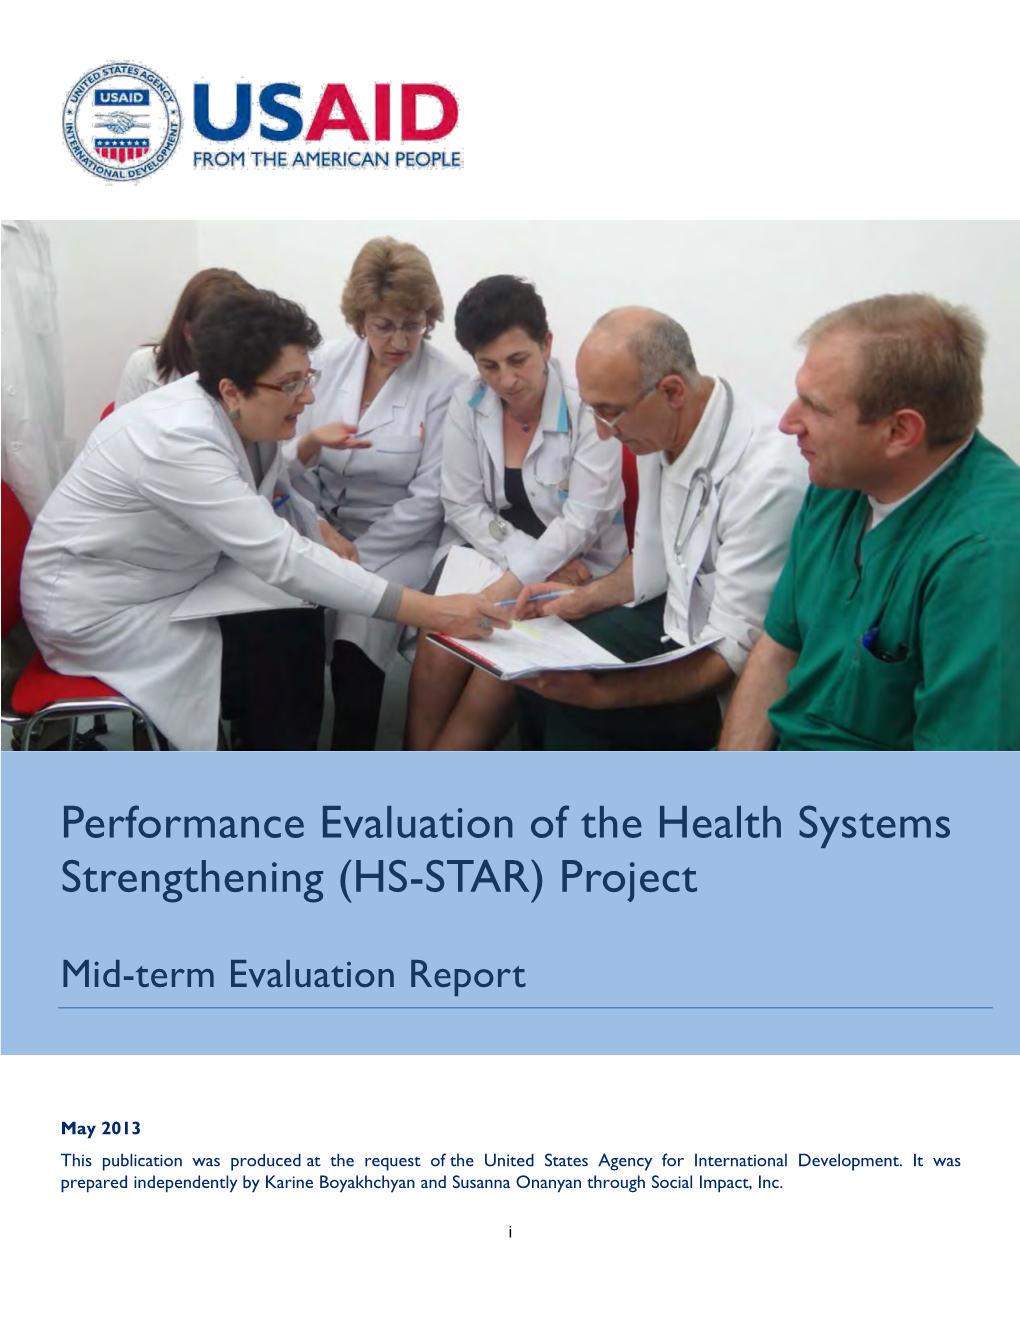 Performance Evaluation of the Health Systems Strengthening (HS-STAR) Project